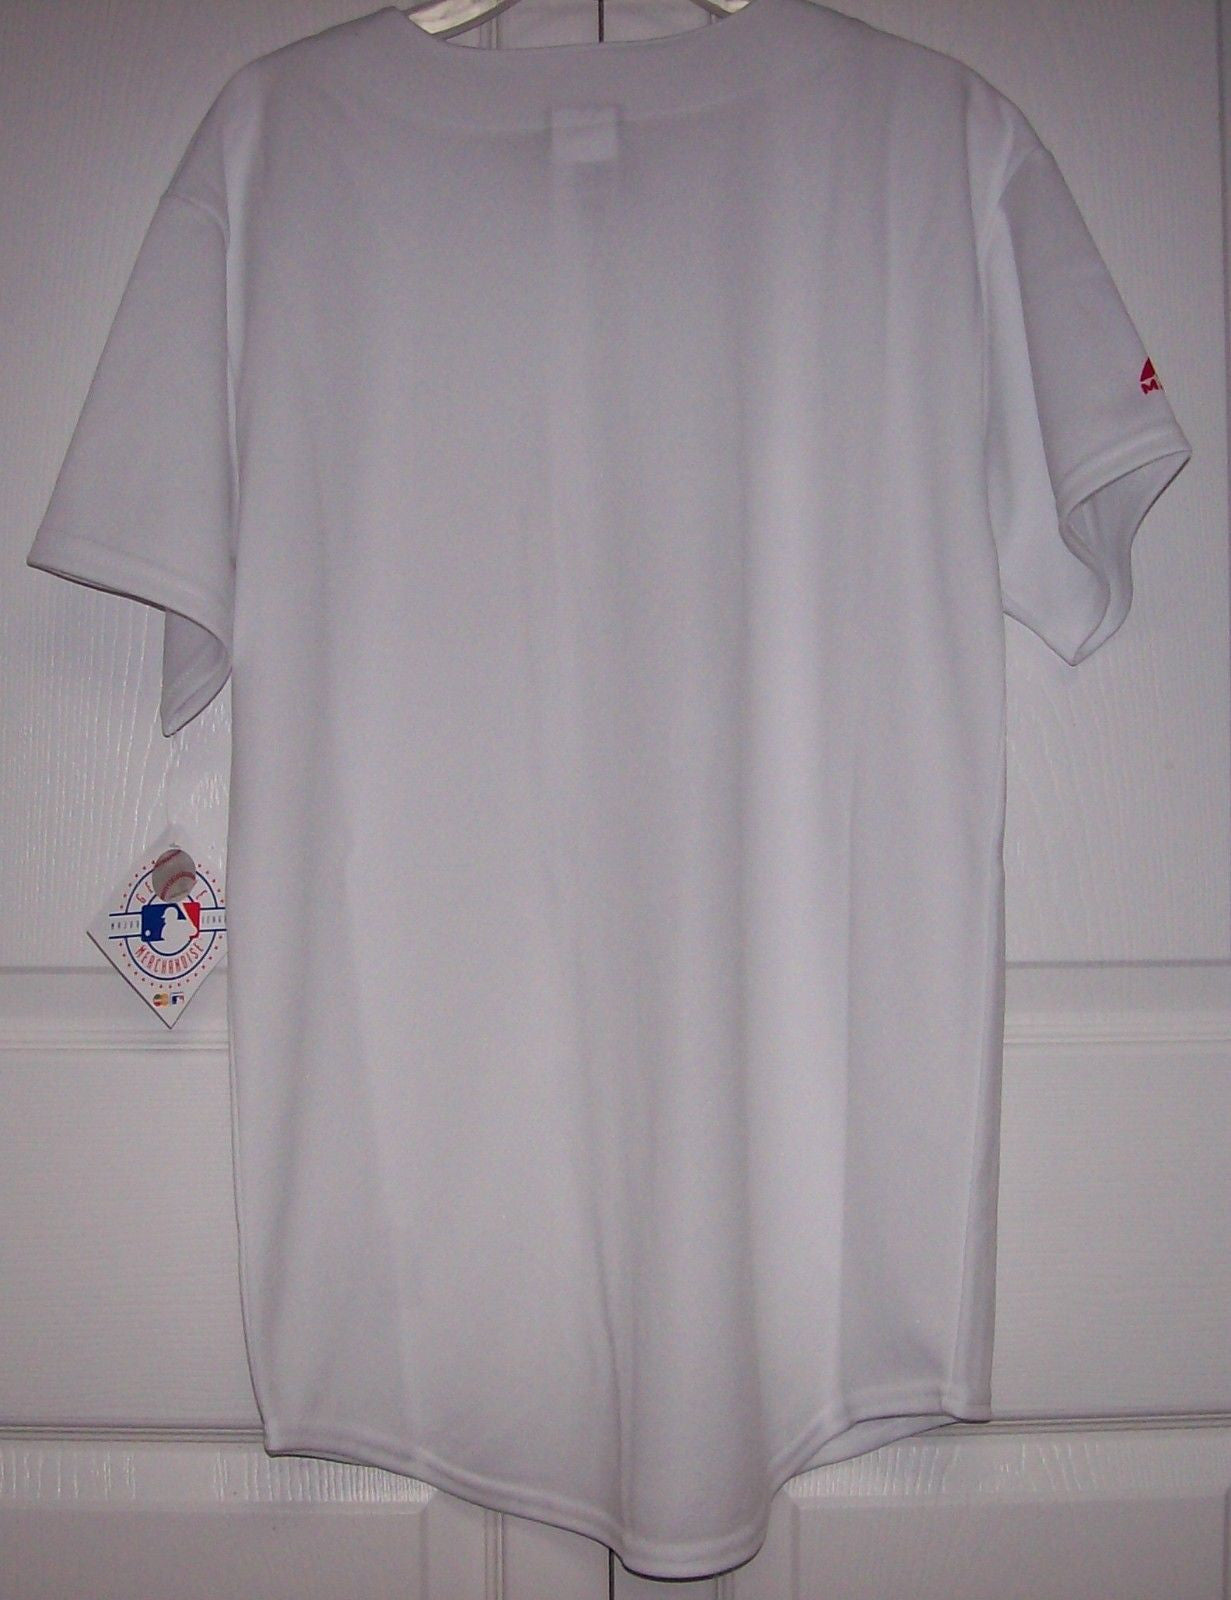 Men's Gray St. Louis Cardinals Replica V-Neck Jersey Size: Small